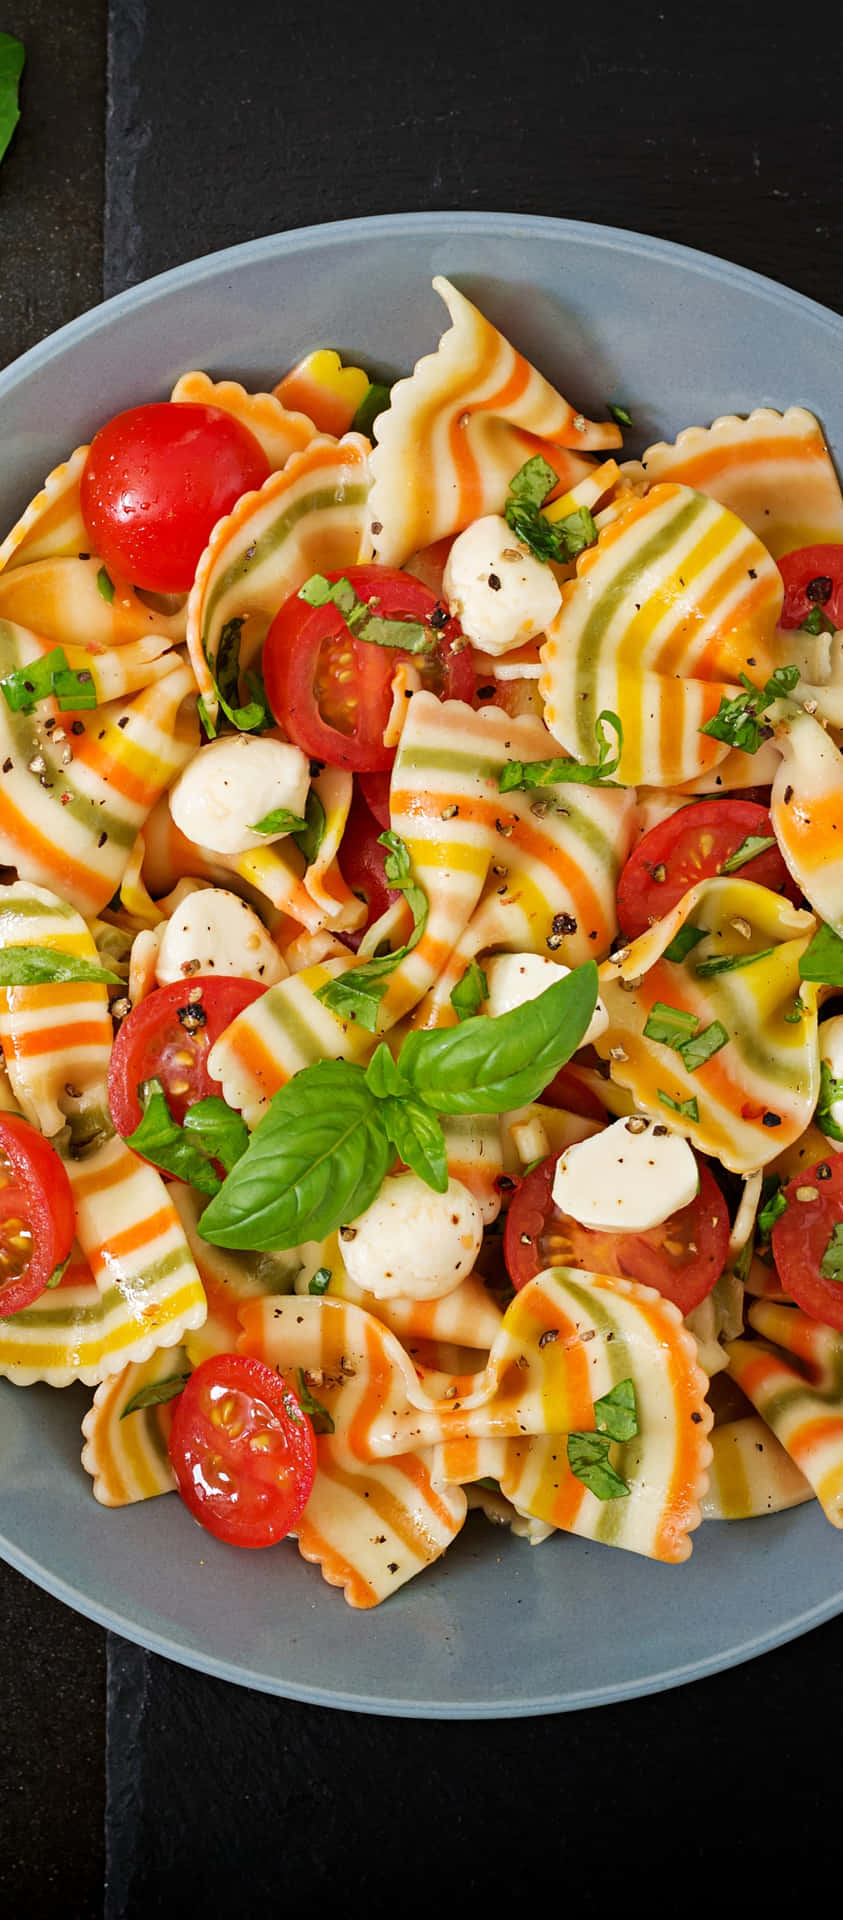 Get creative with Best Pasta and make delicious meals!